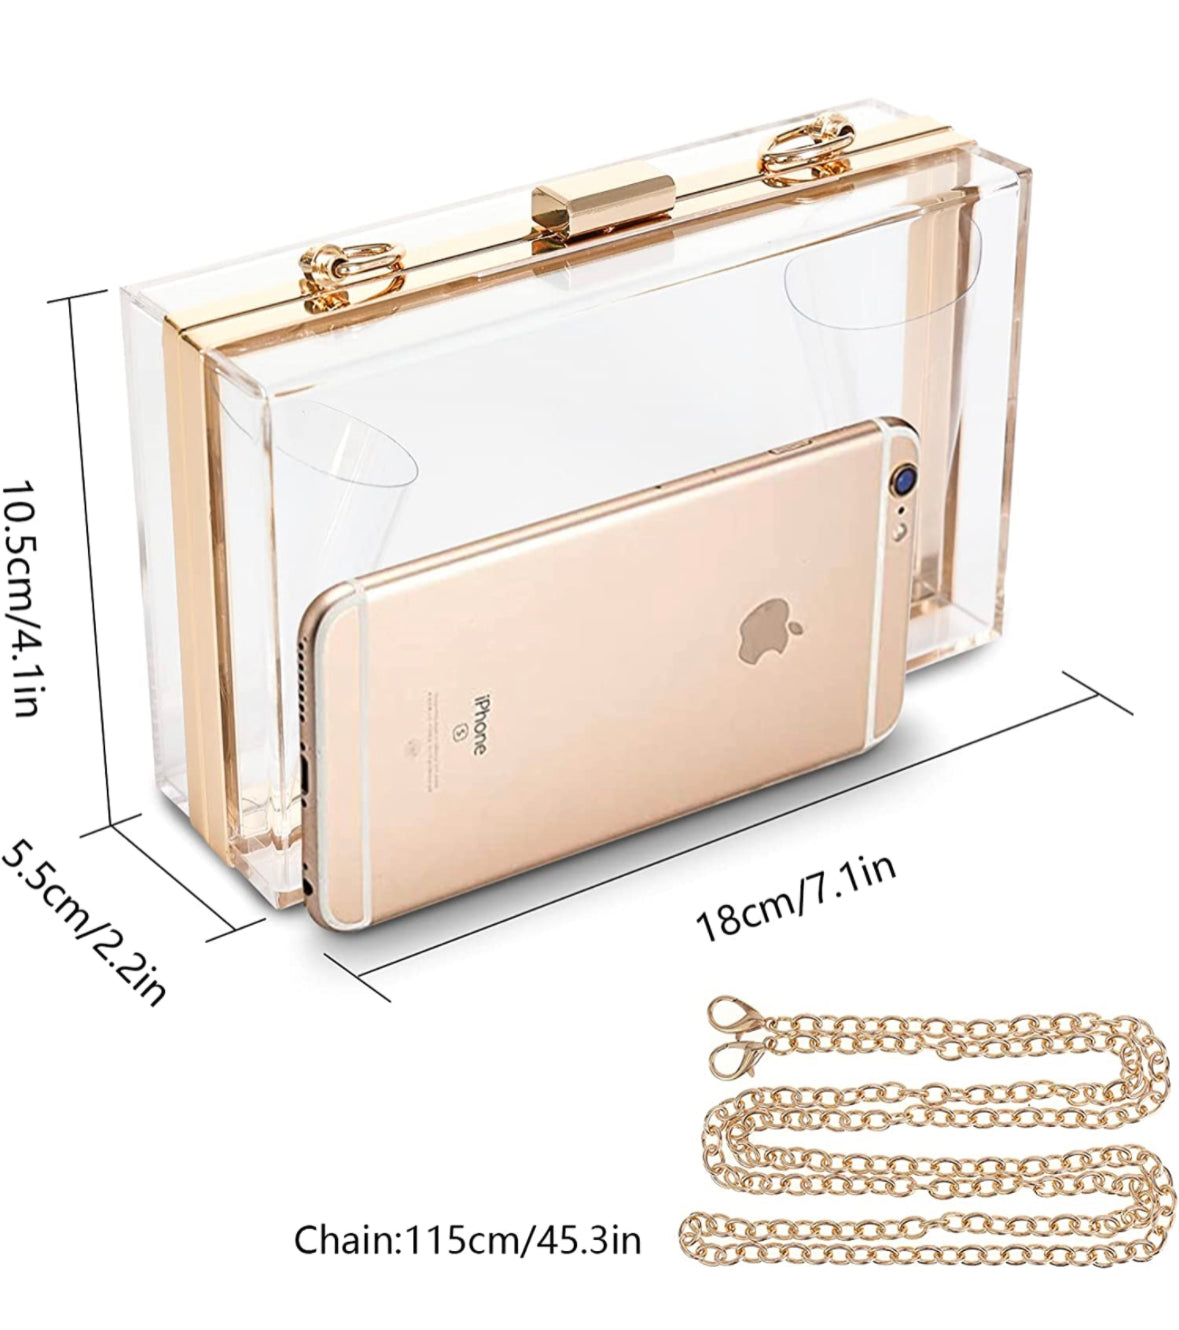 Goaste Clear Acrylic Square Bag, Women Transparent Jelly Evening Purse,  Cross Body Bag with Removable Gold Chain, Cute Banquet Handbag for Dinner  Party, Wedding, Family Reunion, Date: Handbags: Amazon.com